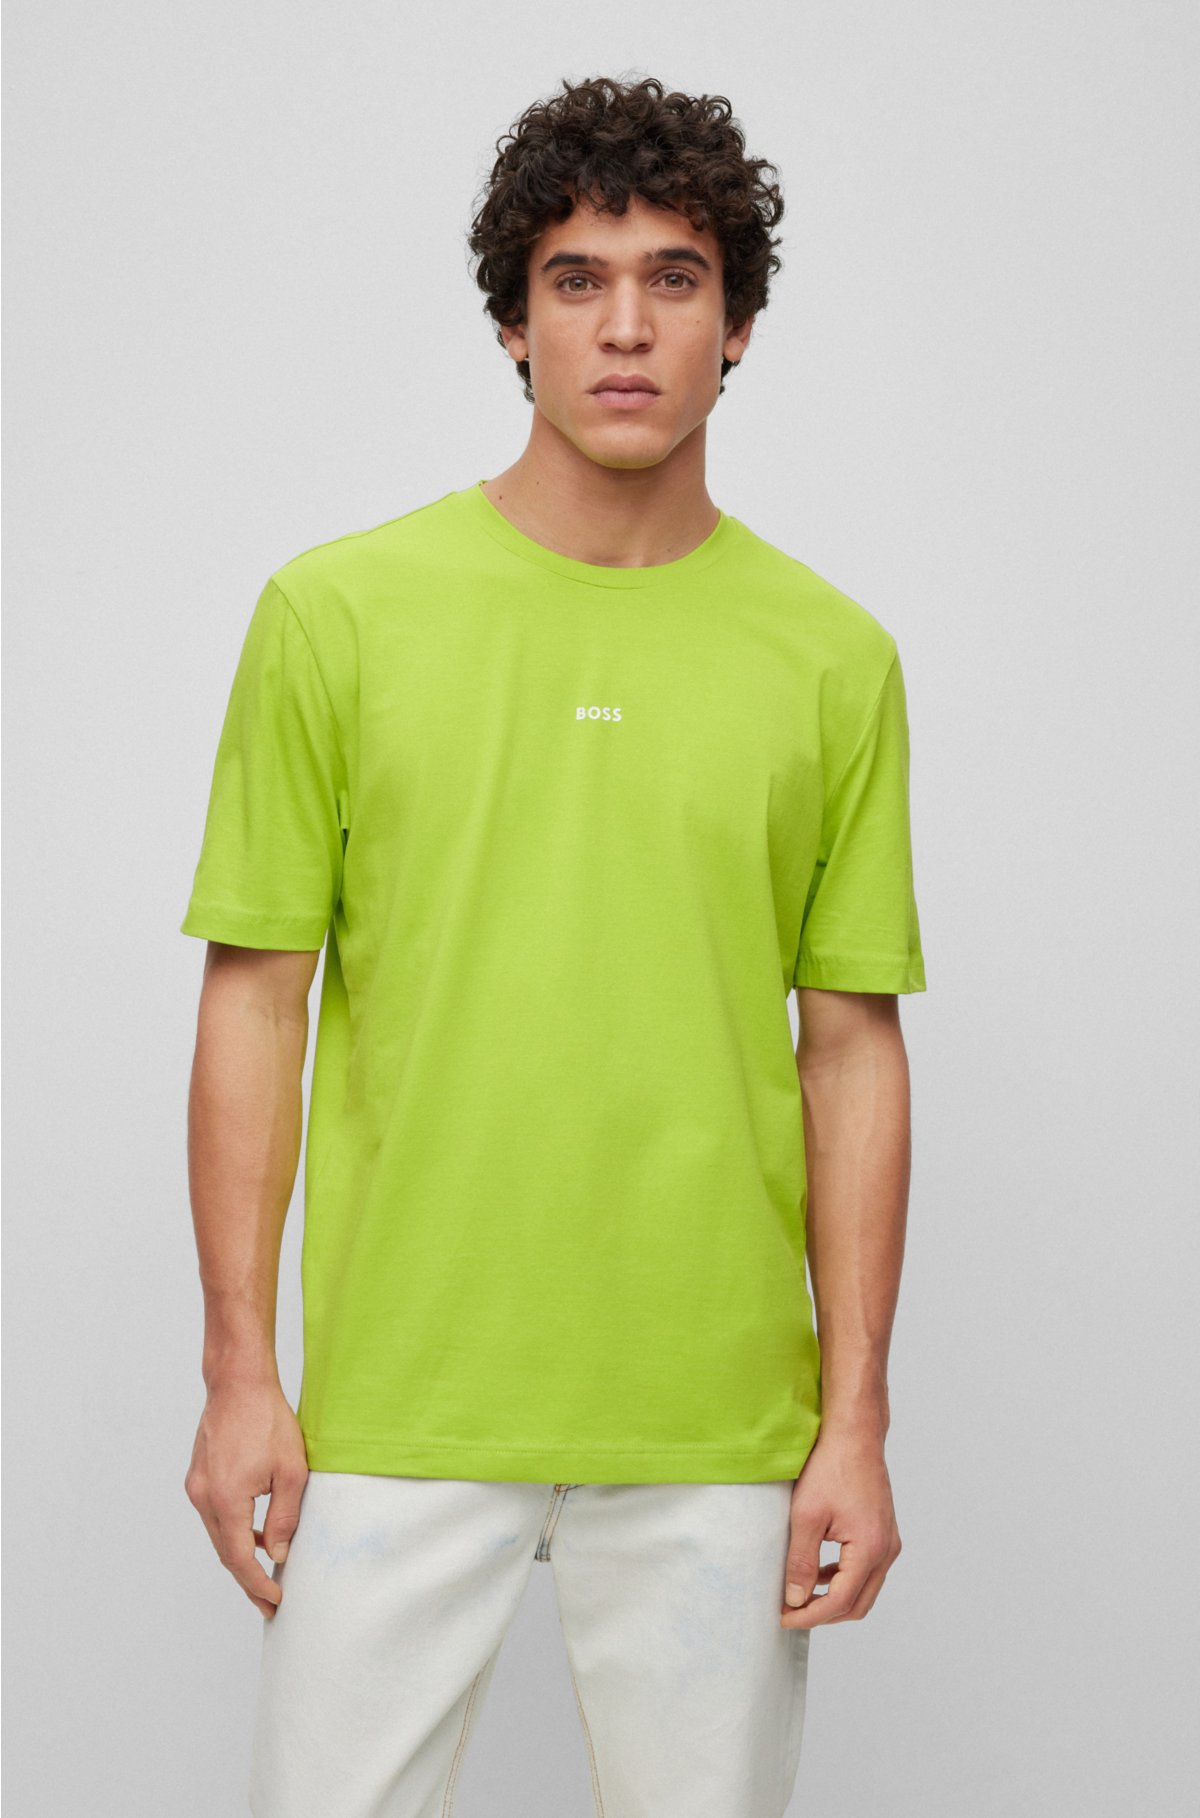 BOSS - Relaxed-fit T-shirt in cotton with logo print